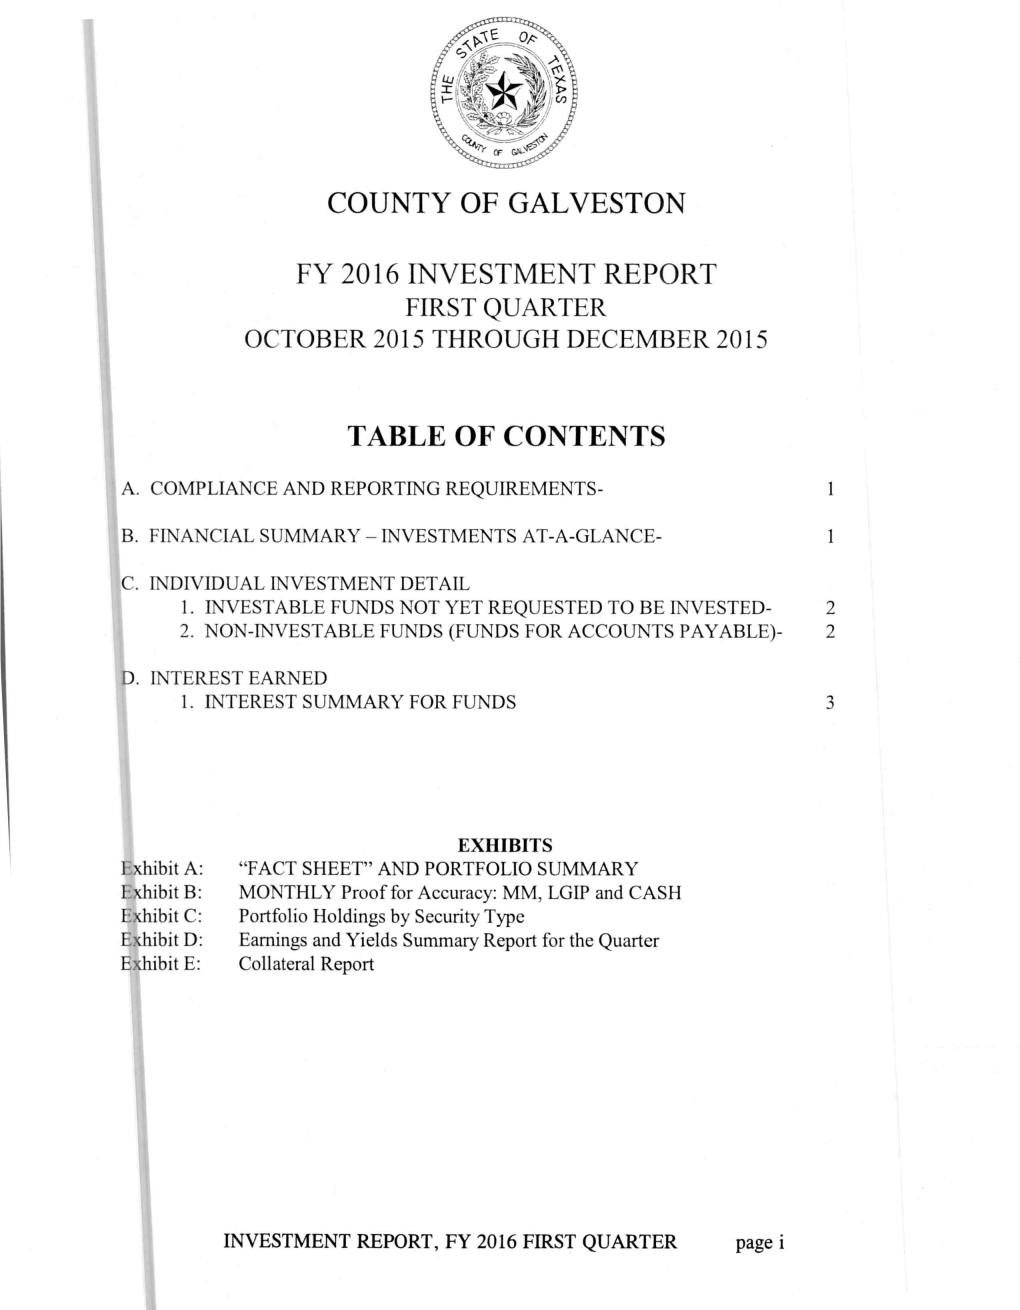 County of Galveston Fy 2016 Investment Report Table of Contents